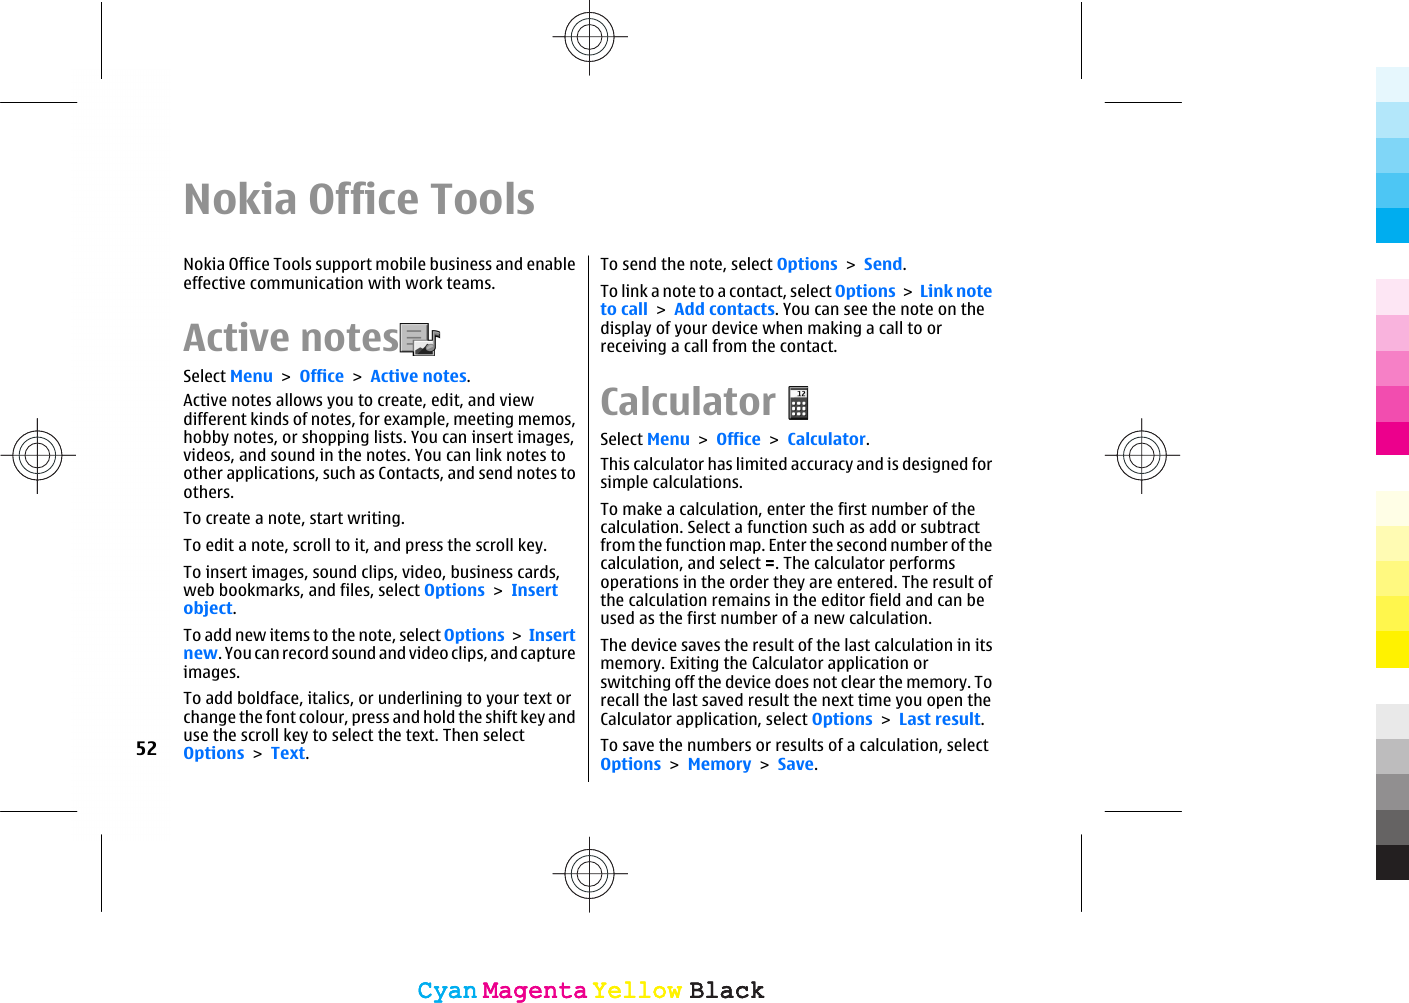 Nokia Office ToolsNokia Office Tools support mobile business and enableeffective communication with work teams.Active notes  Select Menu &gt; Office &gt; Active notes.Active notes allows you to create, edit, and viewdifferent kinds of notes, for example, meeting memos,hobby notes, or shopping lists. You can insert images,videos, and sound in the notes. You can link notes toother applications, such as Contacts, and send notes toothers.To create a note, start writing.To edit a note, scroll to it, and press the scroll key.To insert images, sound clips, video, business cards,web bookmarks, and files, select Options &gt; Insertobject.To add new items to the note, select Options &gt; Insertnew. You can record sound and video clips, and captureimages.To add boldface, italics, or underlining to your text orchange the font colour, press and hold the shift key anduse the scroll key to select the text. Then selectOptions &gt; Text.To send the note, select Options &gt; Send.To link a note to a contact, select Options &gt; Link noteto call &gt; Add contacts. You can see the note on thedisplay of your device when making a call to orreceiving a call from the contact.CalculatorSelect Menu &gt; Office &gt; Calculator.This calculator has limited accuracy and is designed forsimple calculations.To make a calculation, enter the first number of thecalculation. Select a function such as add or subtractfrom the function map. Enter the second number of thecalculation, and select =. The calculator performsoperations in the order they are entered. The result ofthe calculation remains in the editor field and can beused as the first number of a new calculation.The device saves the result of the last calculation in itsmemory. Exiting the Calculator application orswitching off the device does not clear the memory. Torecall the last saved result the next time you open theCalculator application, select Options &gt; Last result.To save the numbers or results of a calculation, selectOptions &gt; Memory &gt; Save.52CyanCyanMagentaMagentaYellowYellowBlackBlackCyanCyanMagentaMagentaYellowYellowBlackBlack